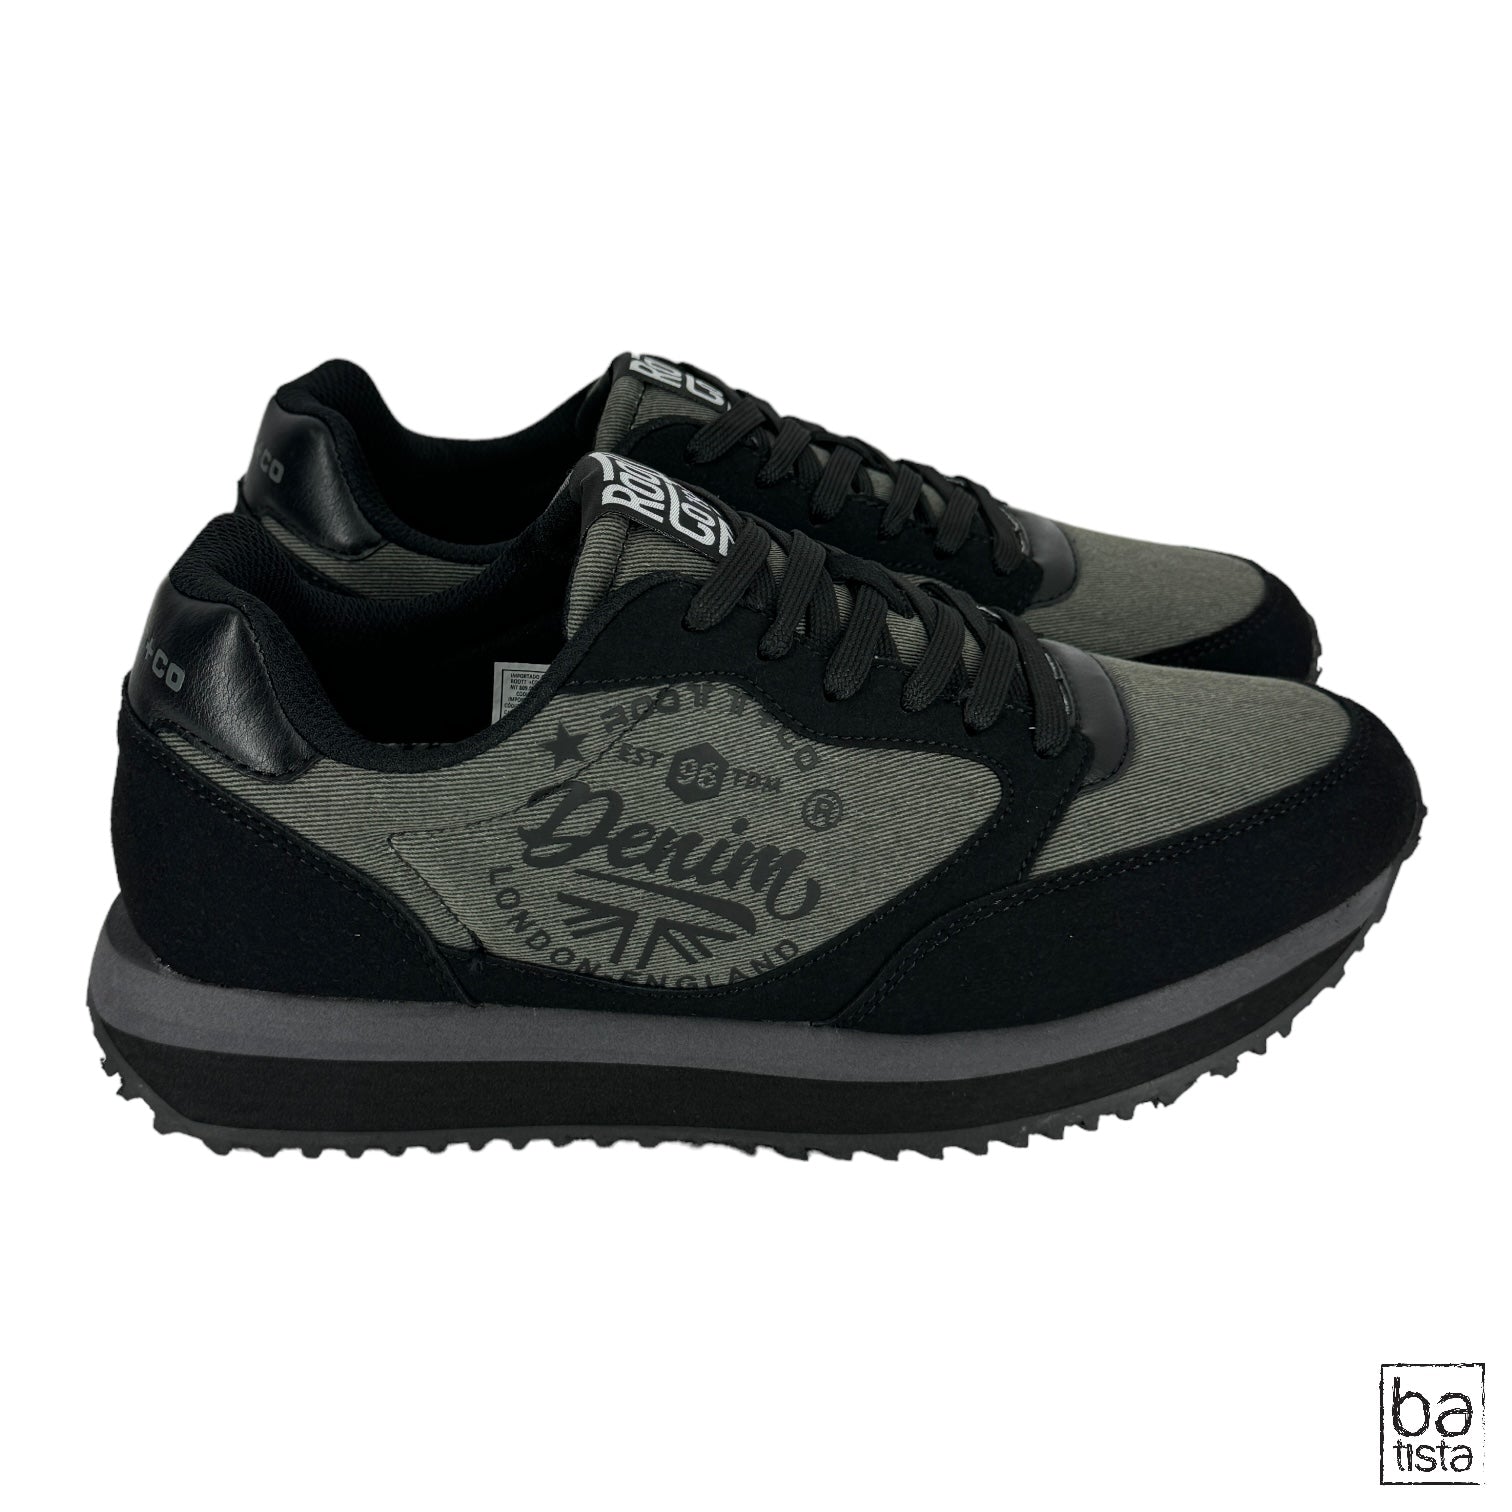 Zapatos Roott + Co 89063